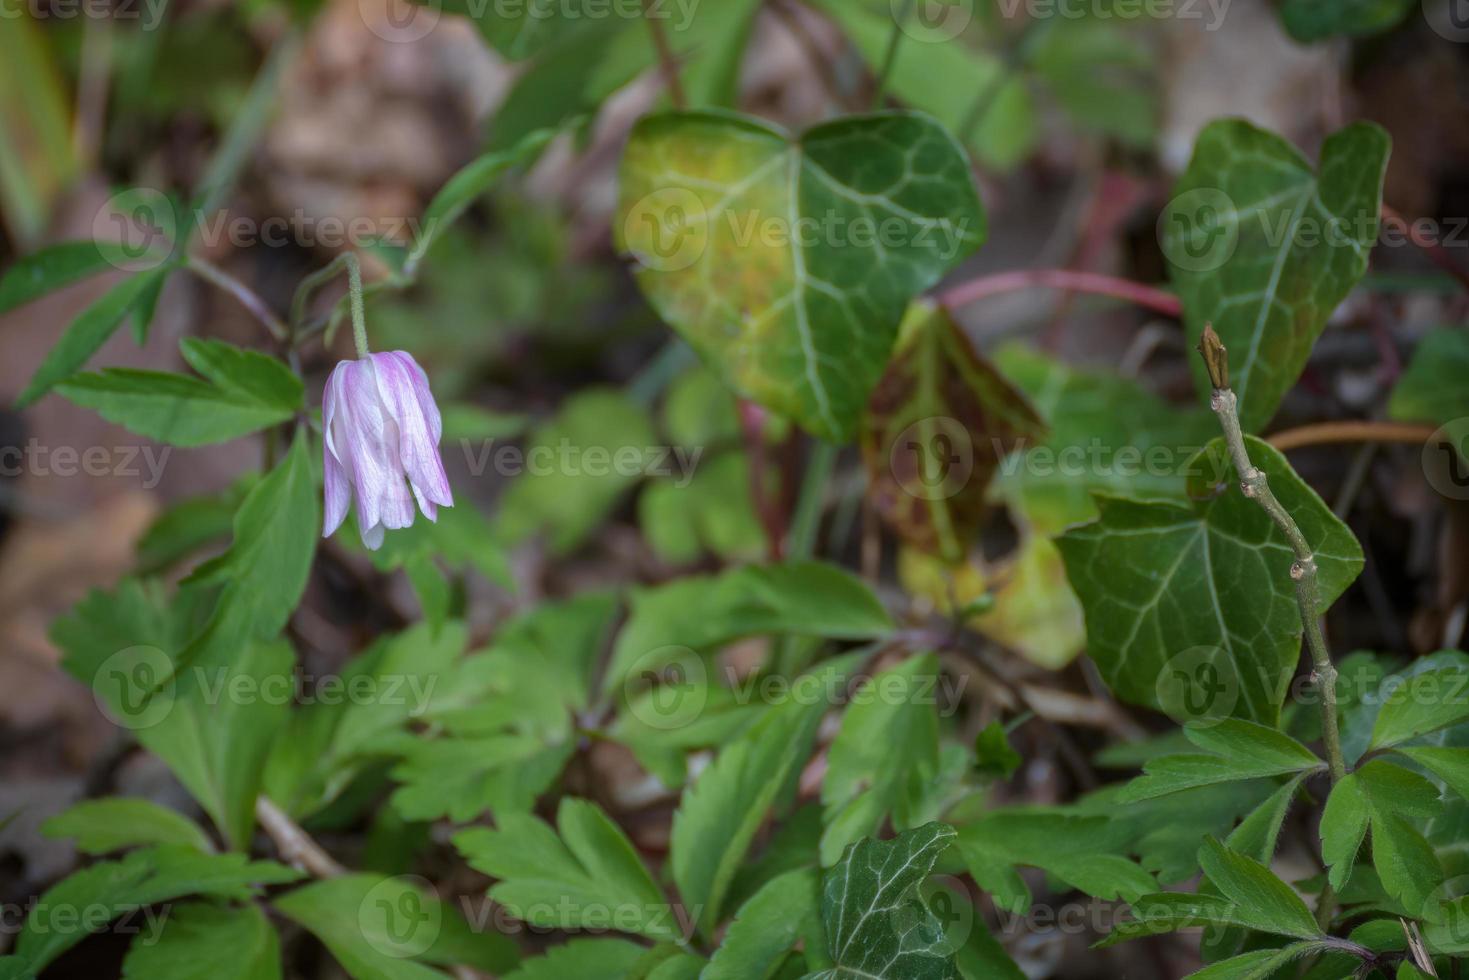 Crowfoot one of the first wild flowers to emerge in springtime photo